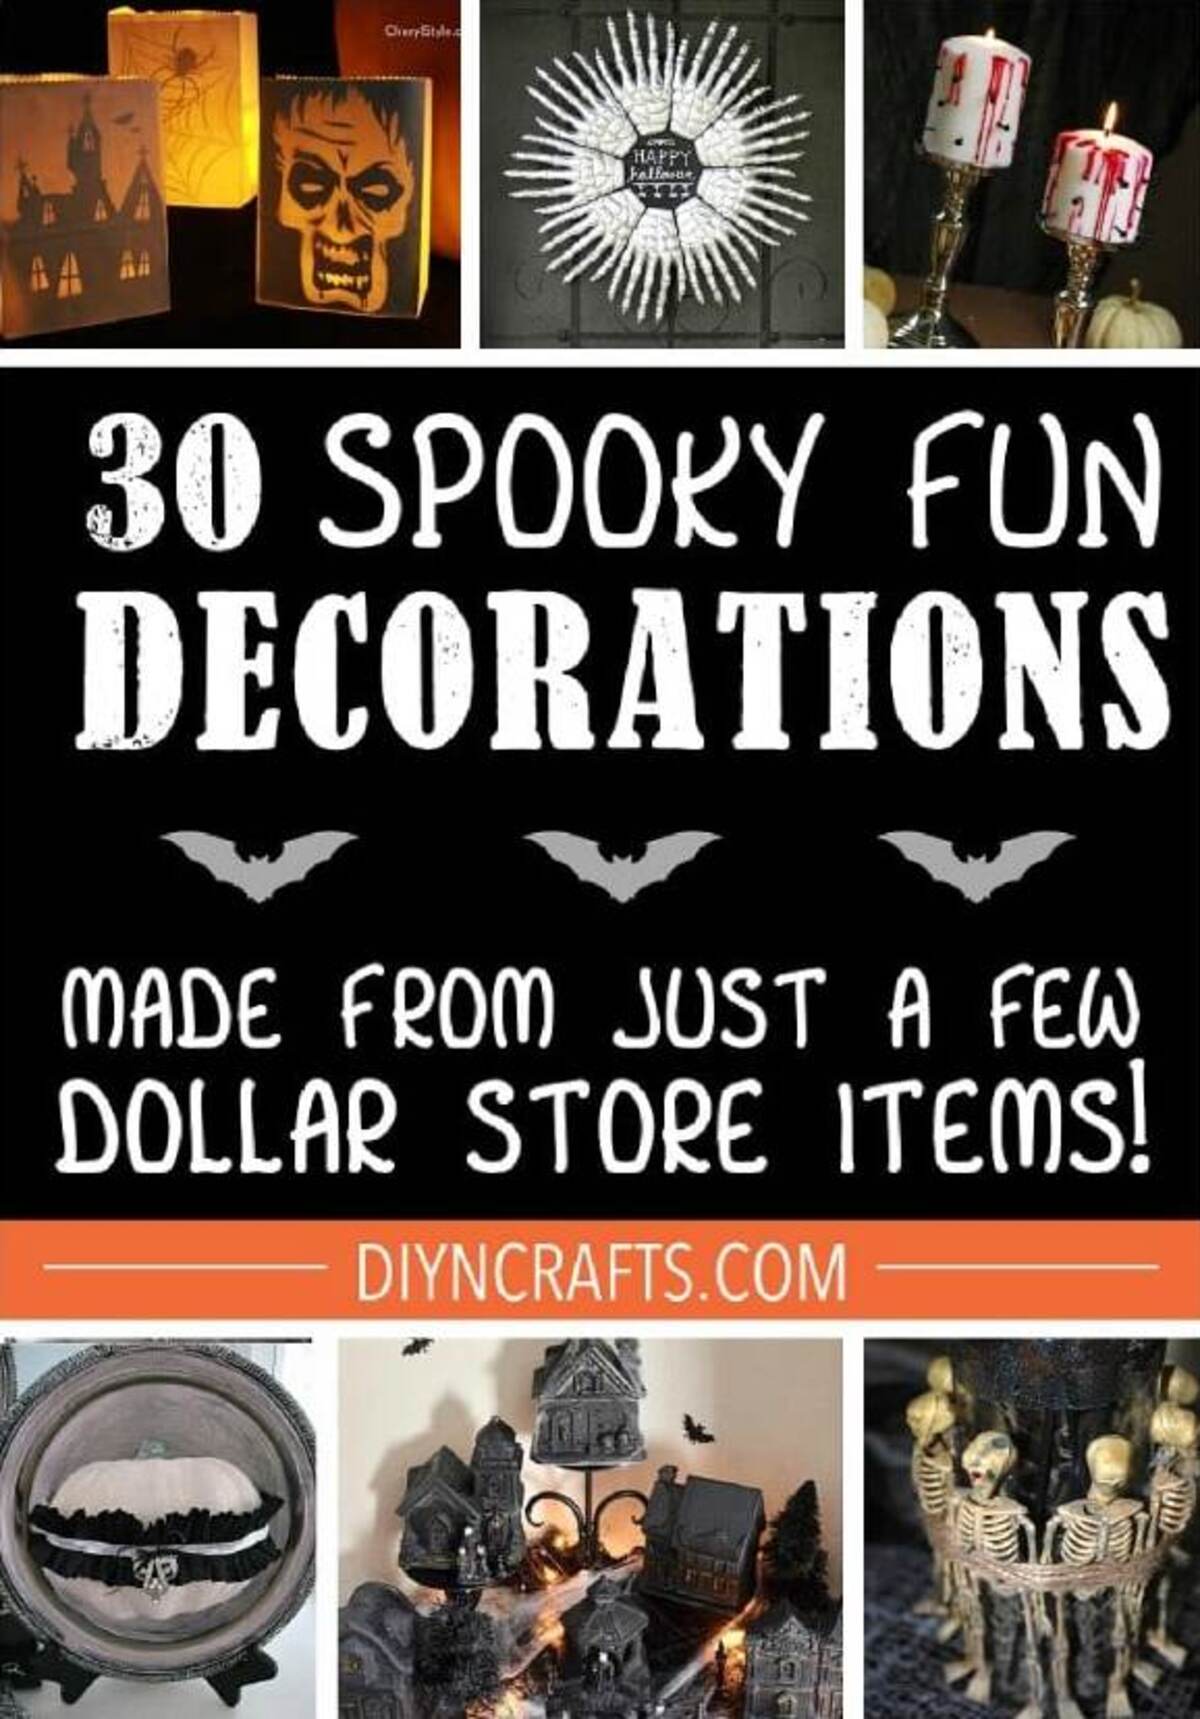 30 Frugally Decorative Dollar Store Halloween Crafts and Decorations for Spooky Fun pinterest image.